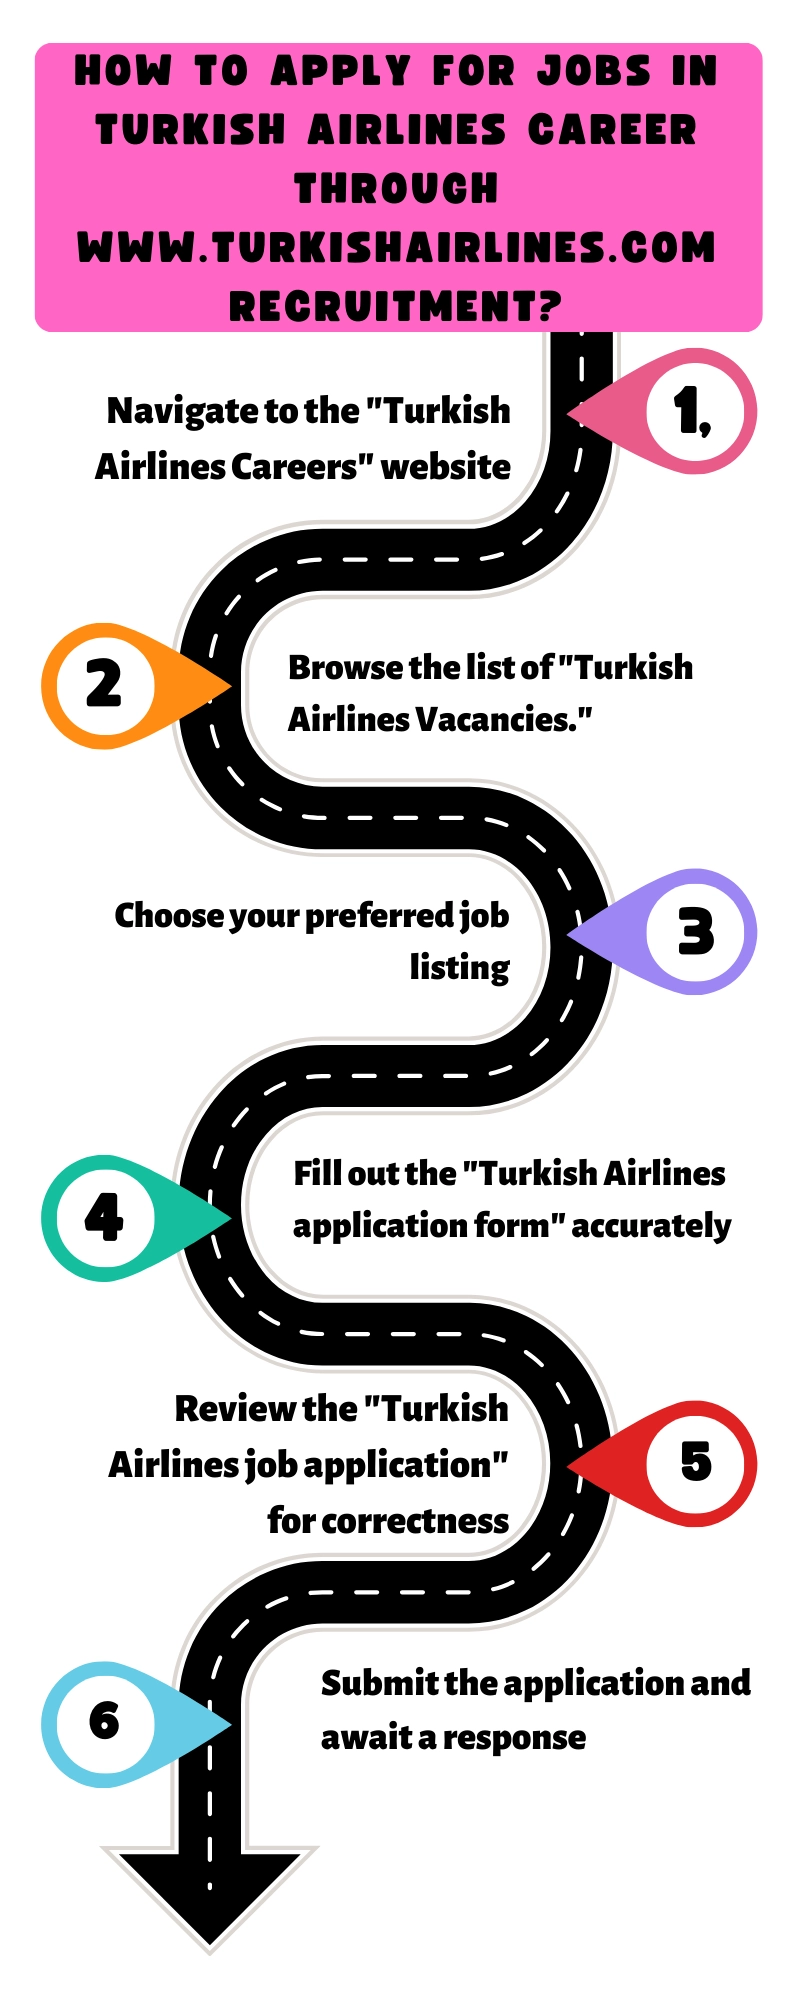 How to Apply for Jobs in Turkish Airlines Career through www.turkishairlines.com recruitment?